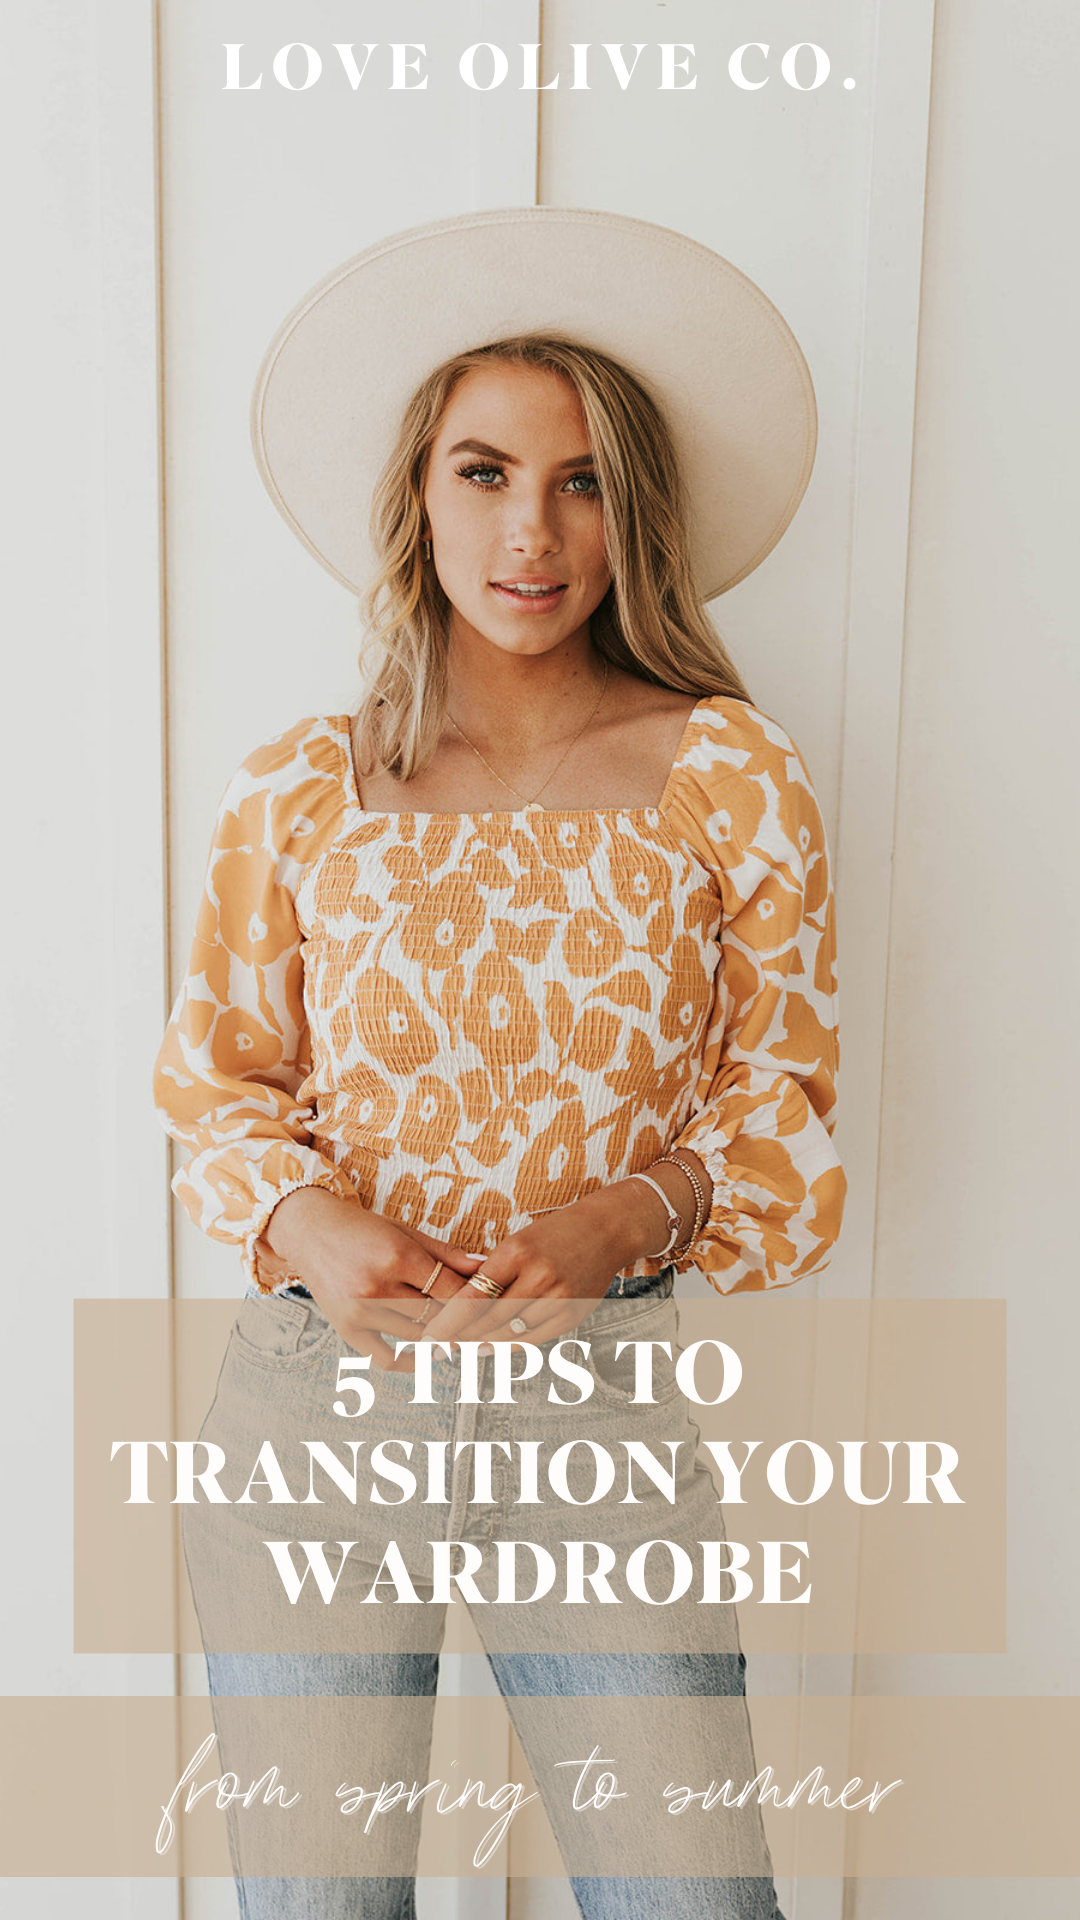 5 tips to transition your wardrobe from spring to summer. www.www.loveoliveshop.com